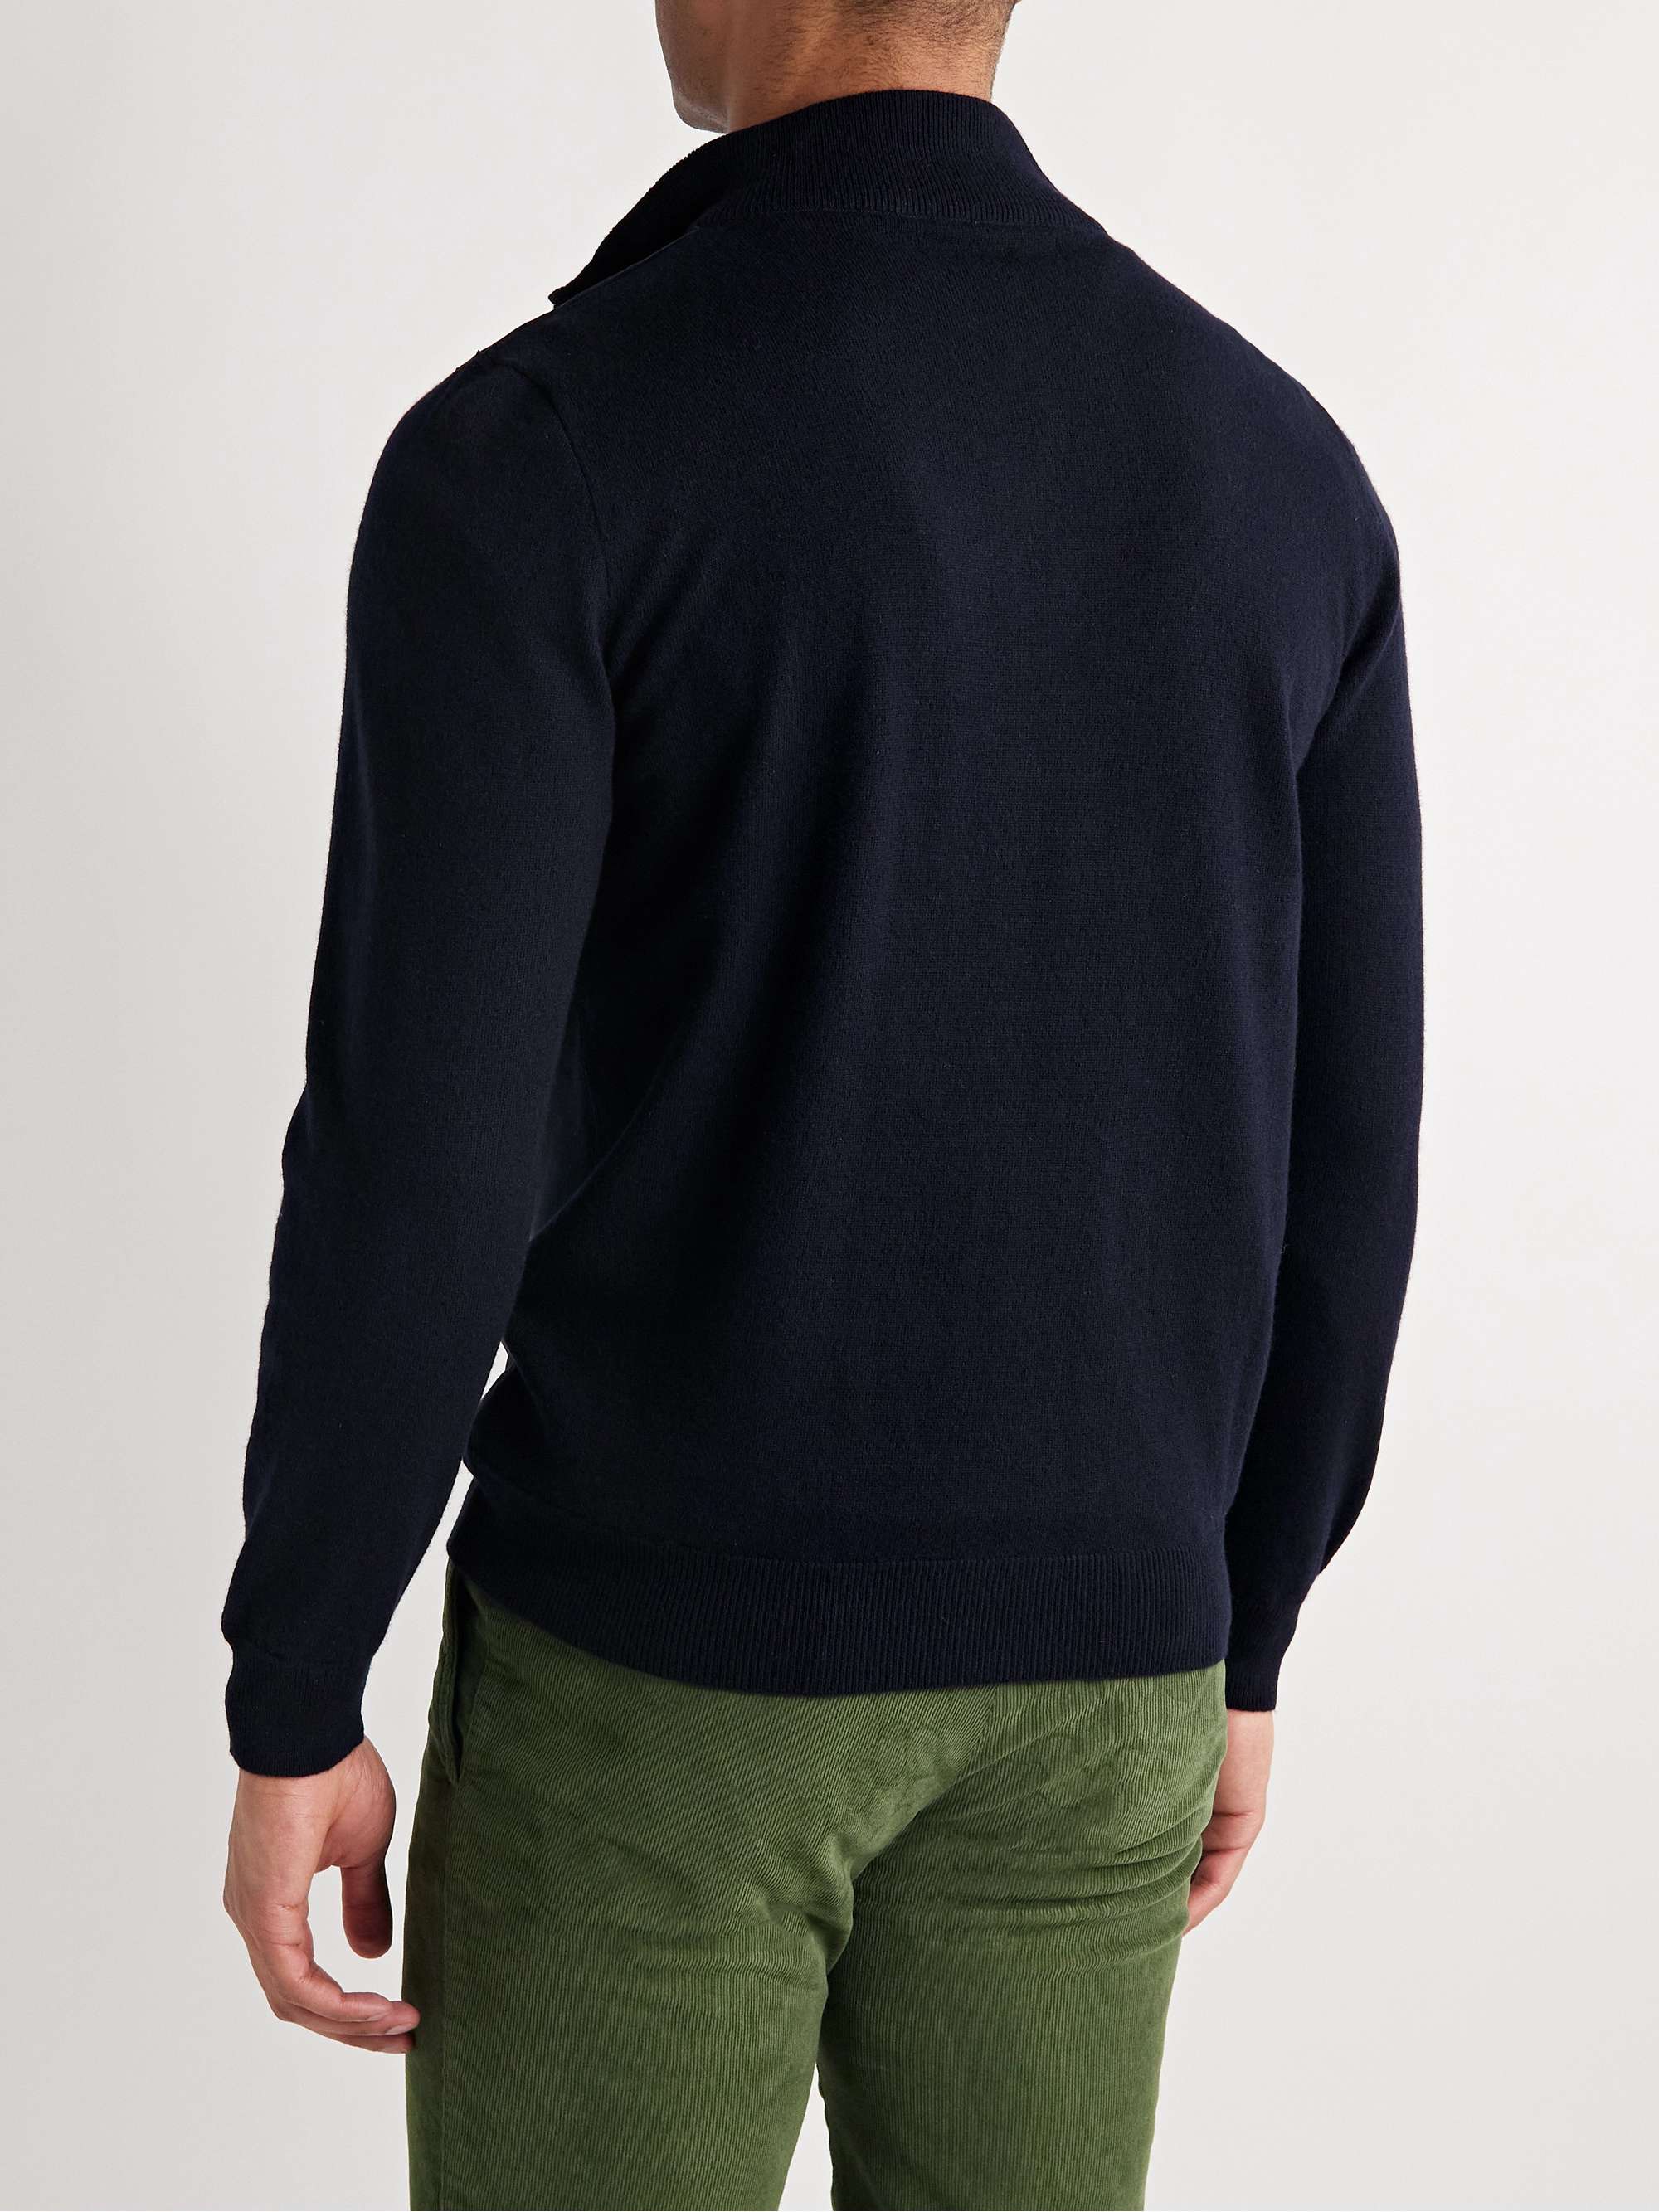 KITON Panelled Nubuck and Cashmere Zip-Up Cardigan for Men | MR PORTER